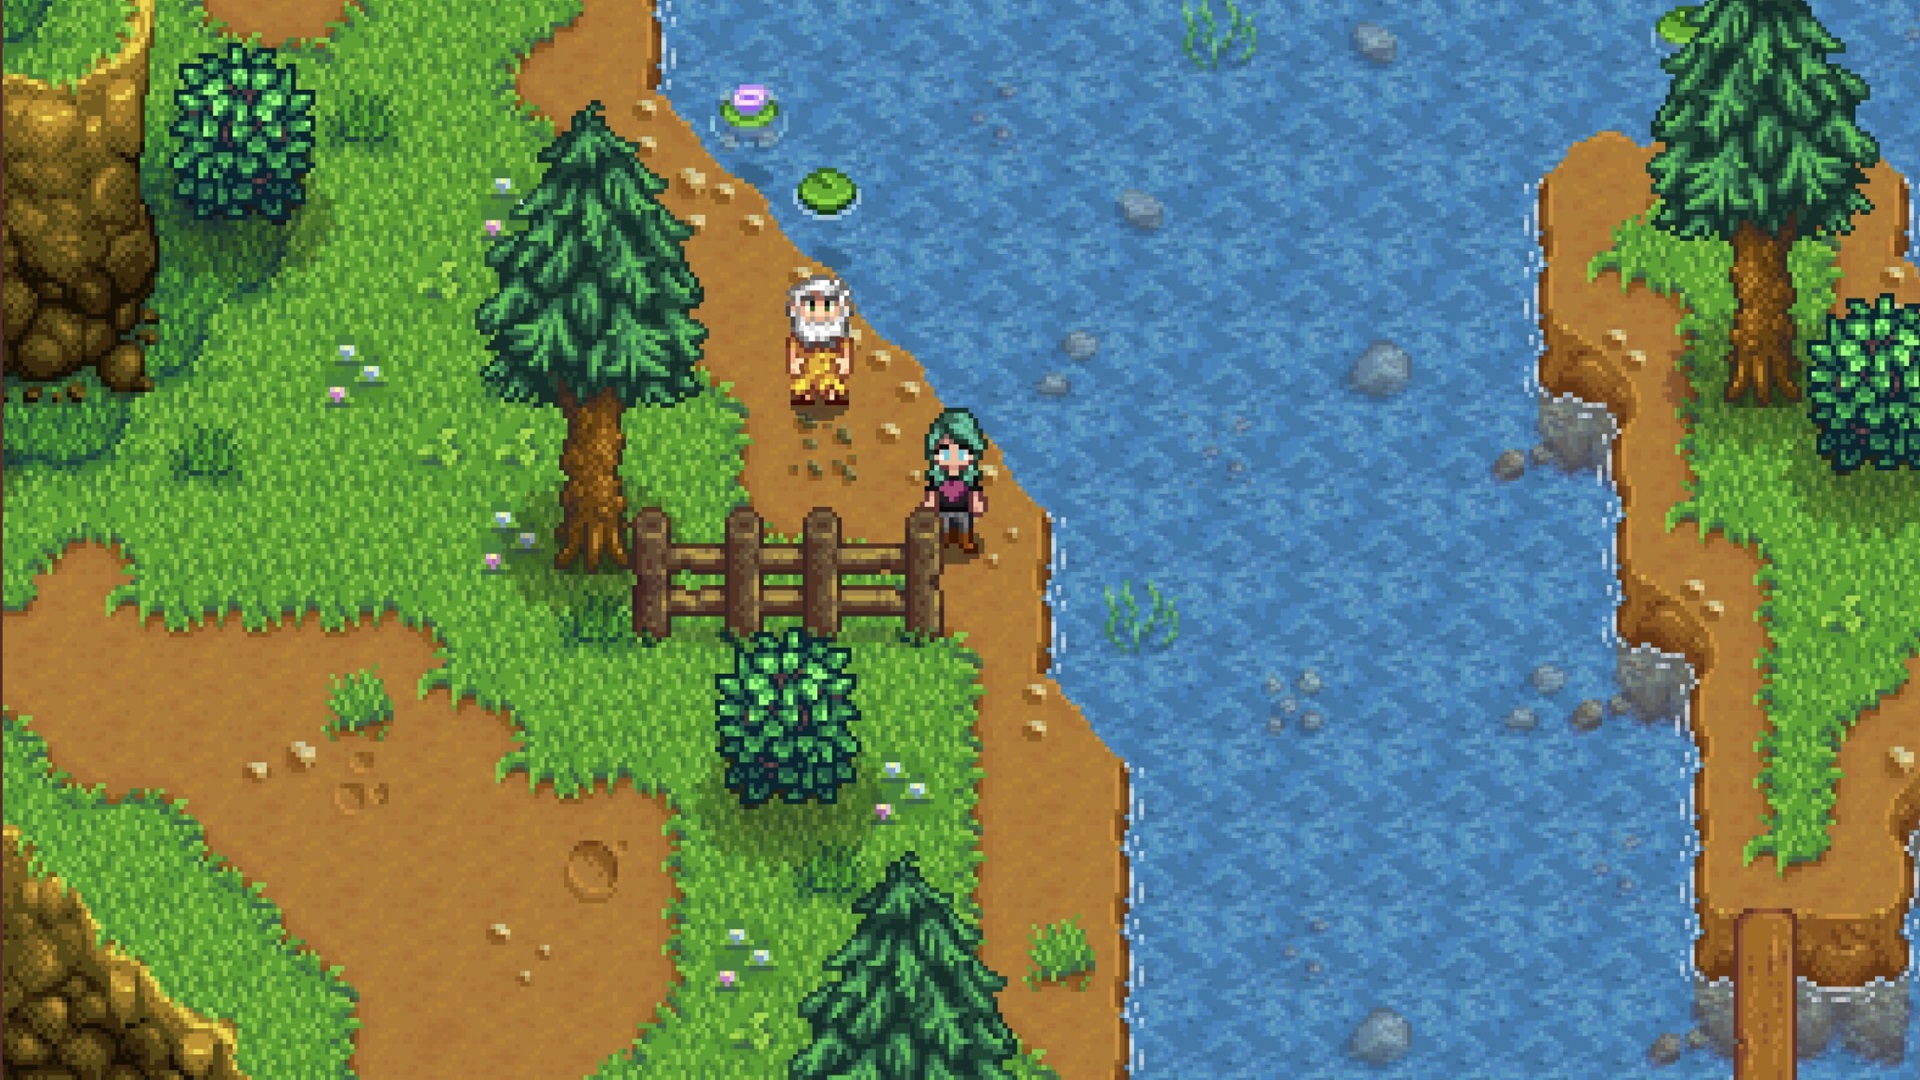 Stardew Valley's Linus standing on the shore